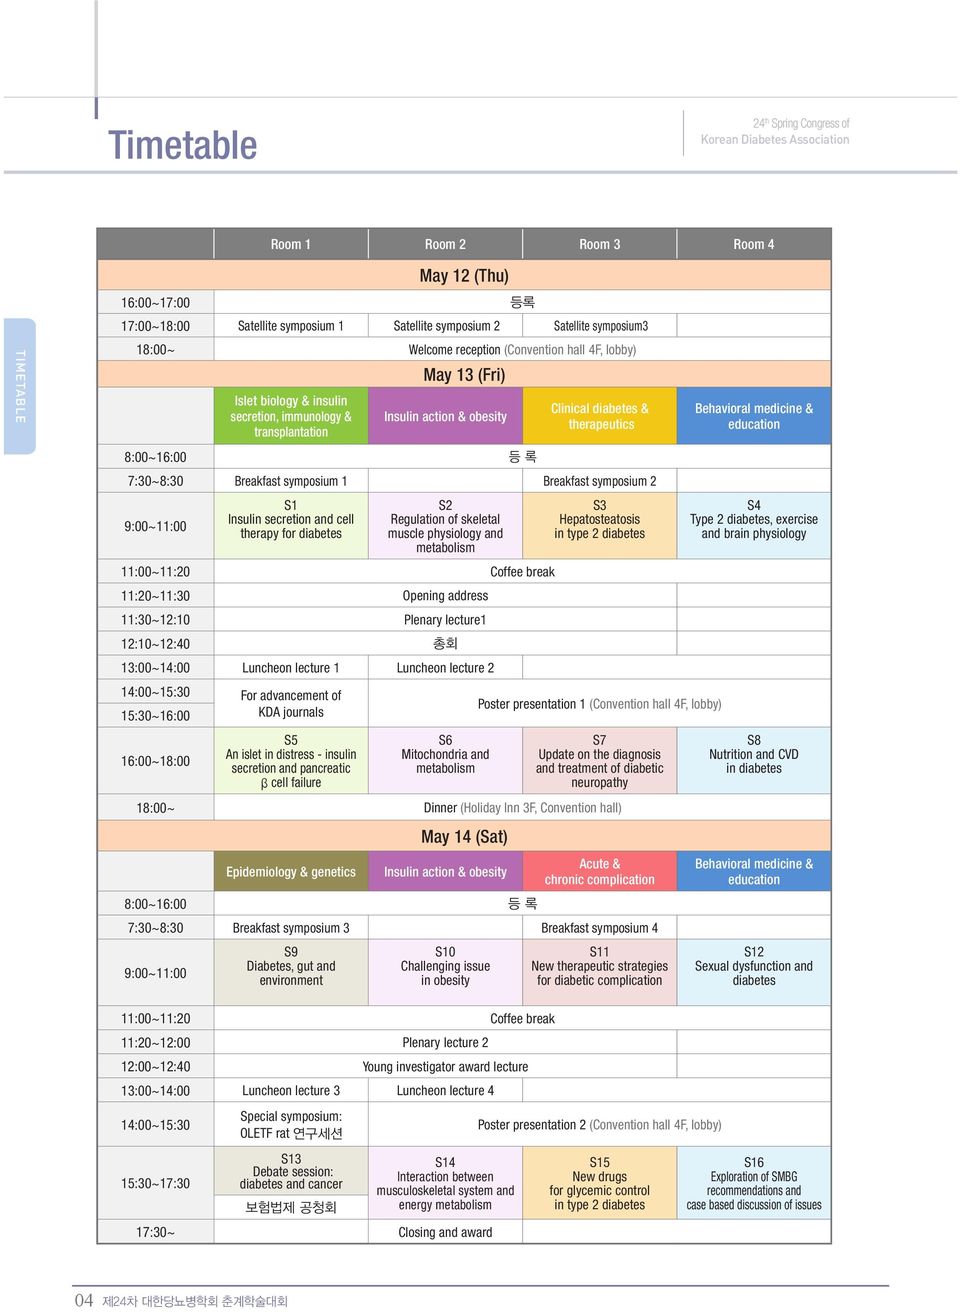 symposium 2 9:00~11:00 S1 Insulin secretion and cell therapy for diabetes S2 Regulation of skeletal muscle physiology and metabolism 11:00~11:20 Coffee break 11:20~11:30 Opening address 11:30~12:10